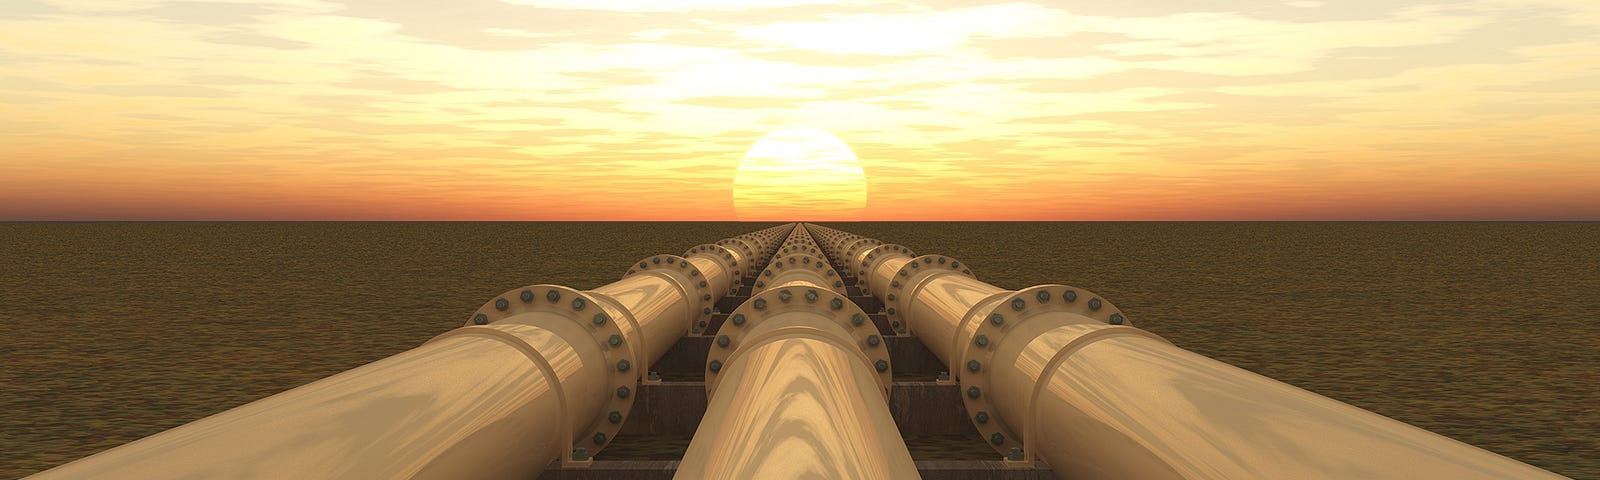 water or oil pipeline to depict design principles for building a effective data pipeline